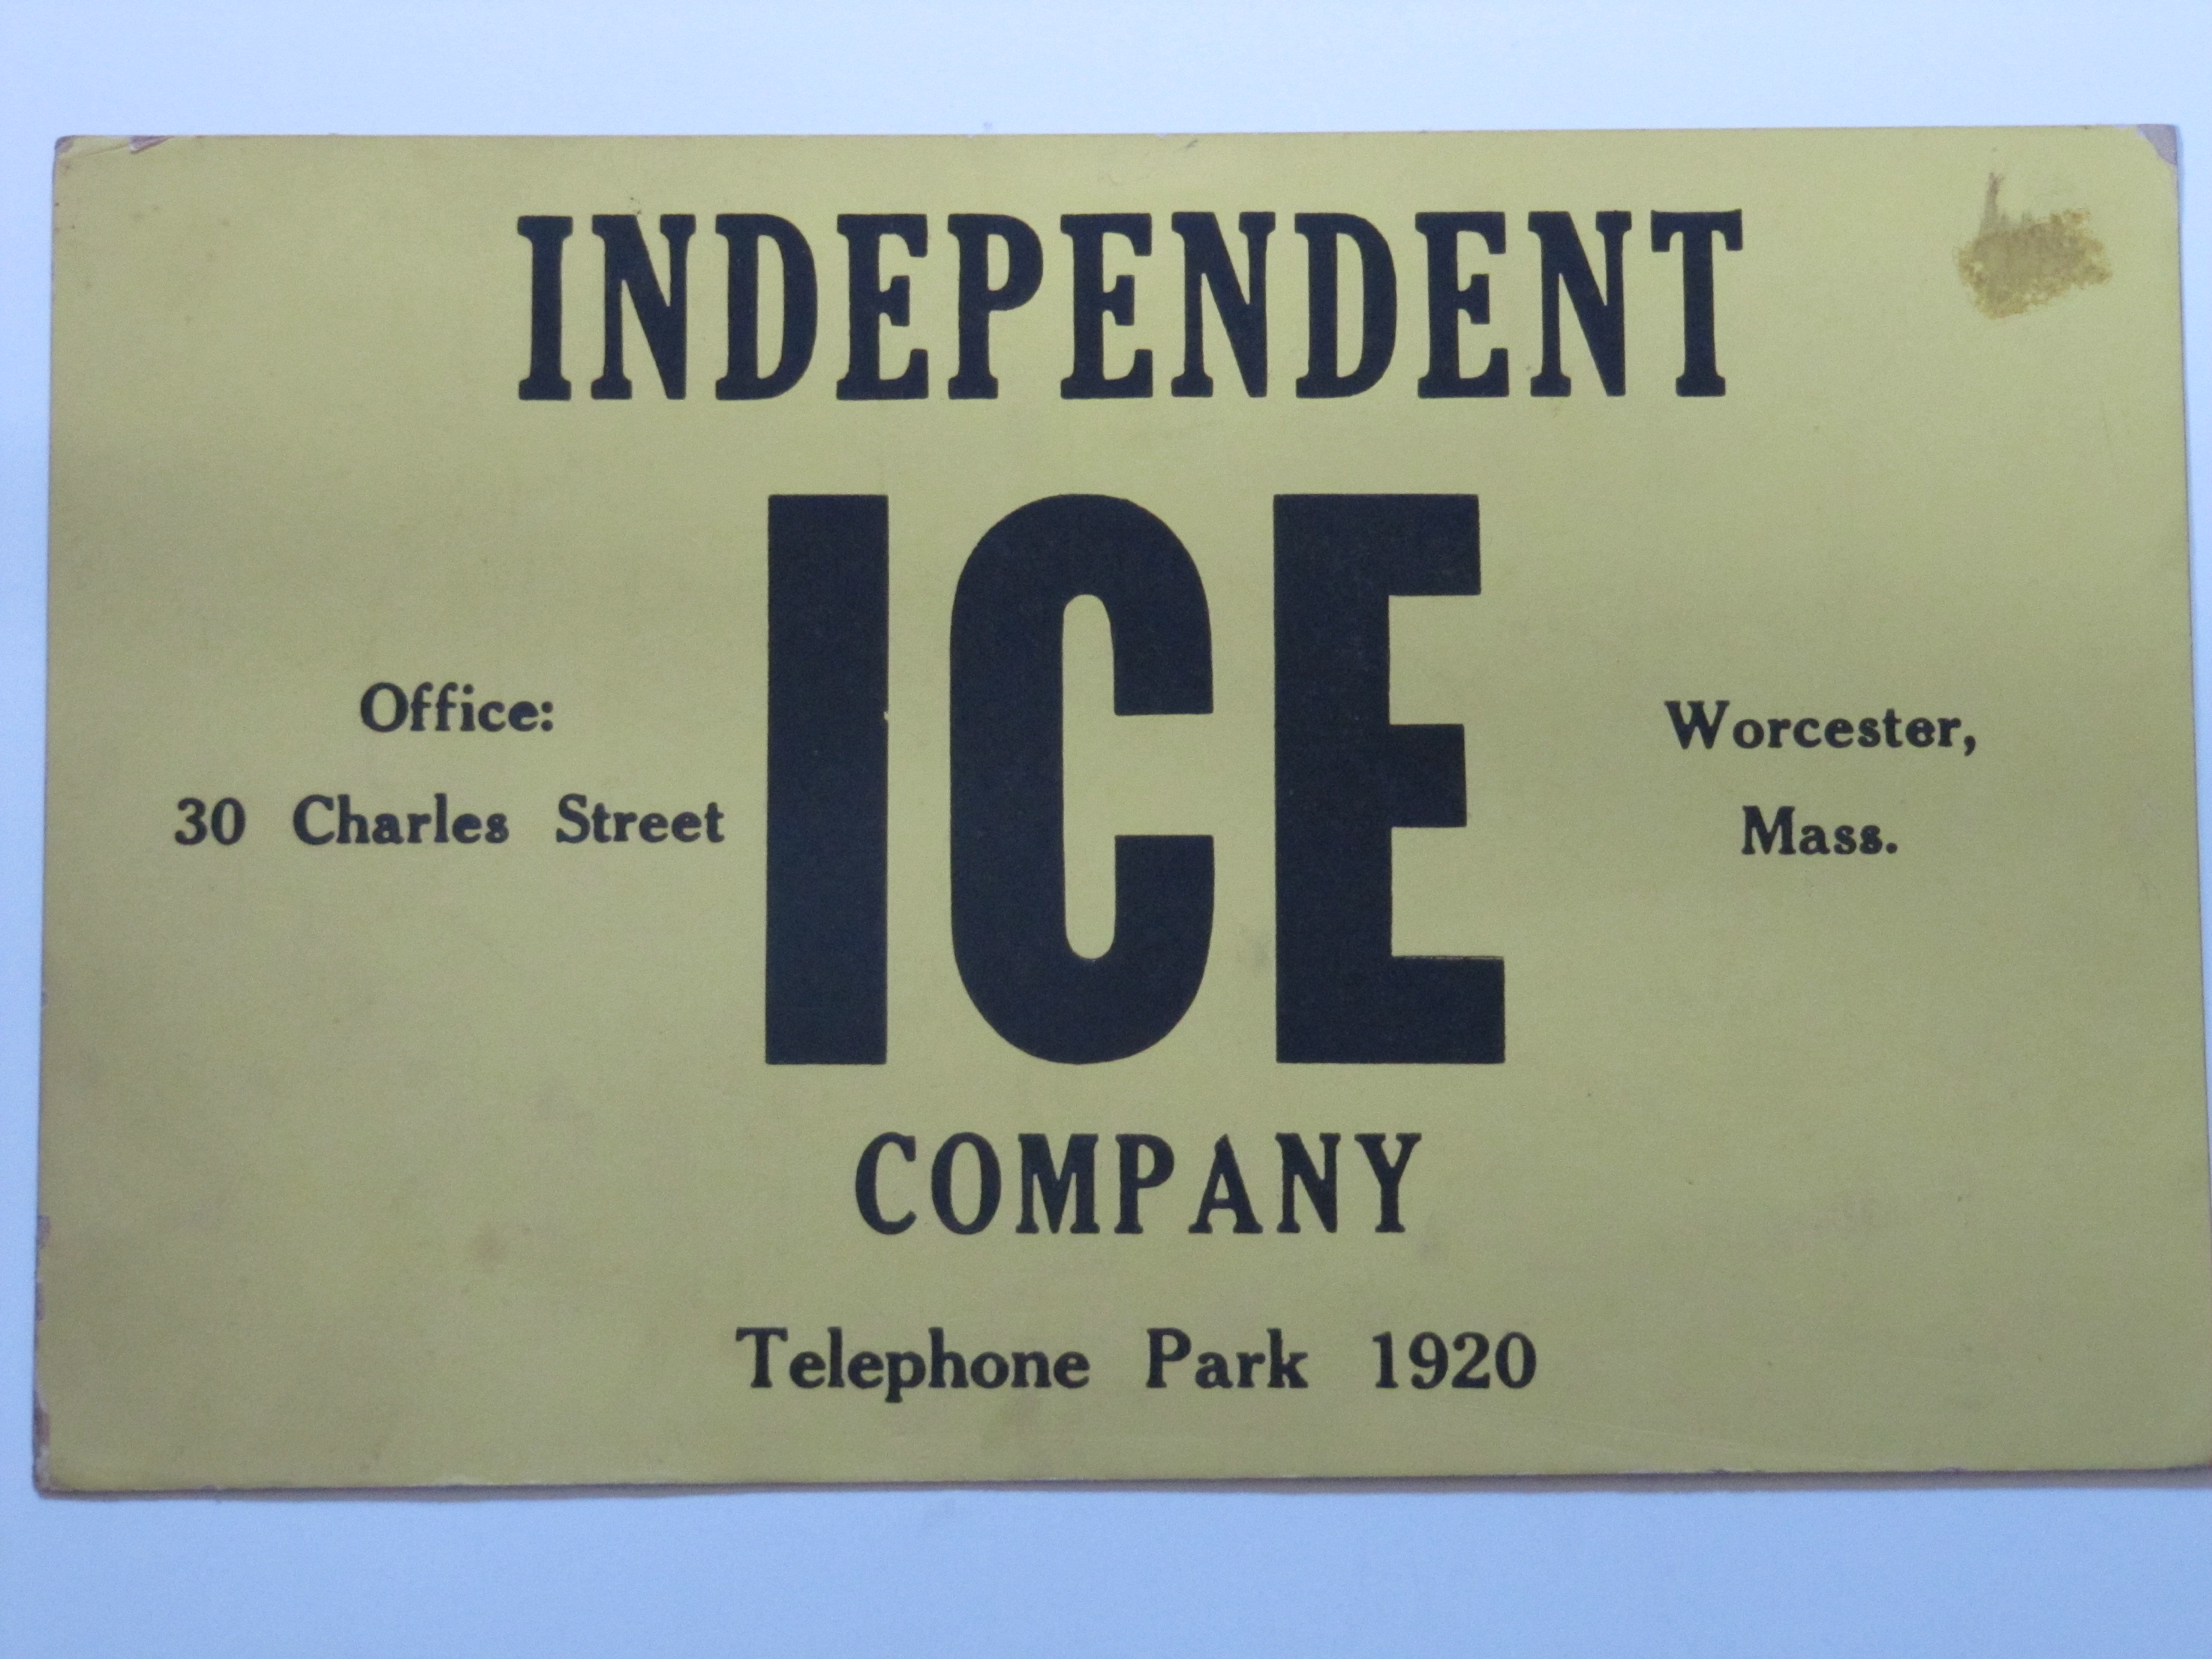 Independent Ice Worcester Mass